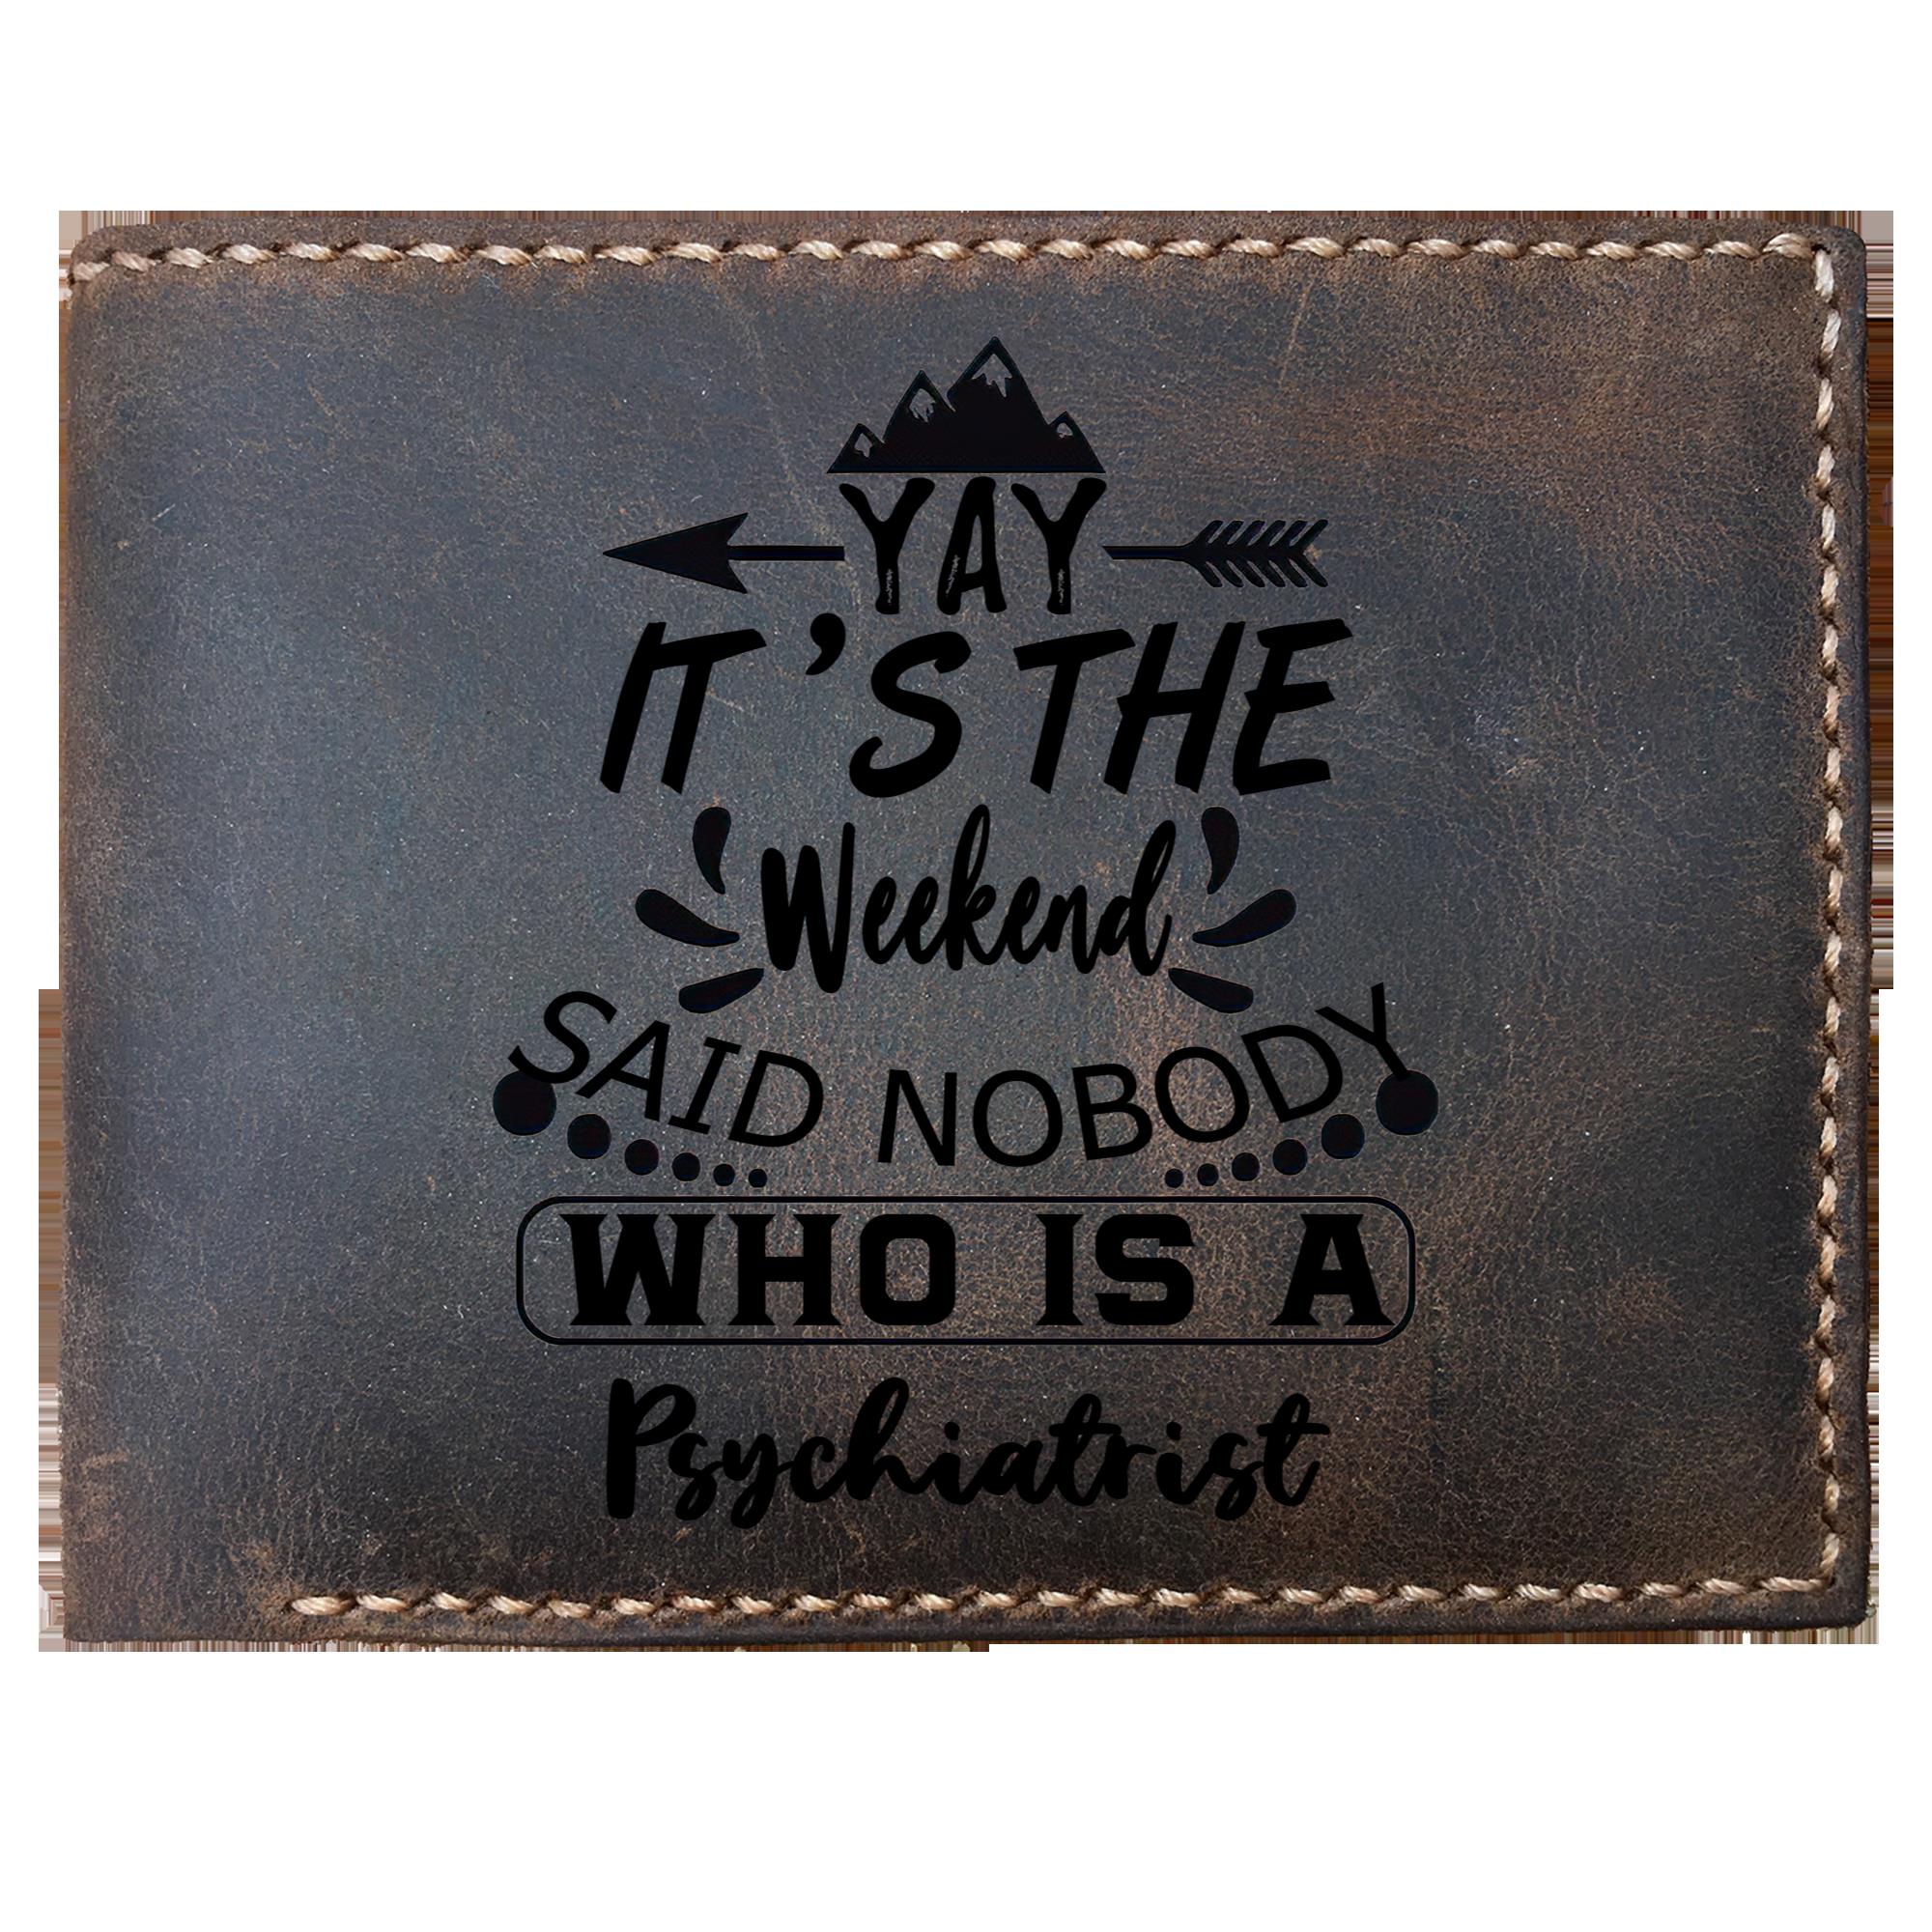 Skitongifts Funny Custom Laser Engraved Bifold Leather Wallet For Men, It's The Weekend Said Nobody Who Is A Psychiatrist, Father's Day Gifts